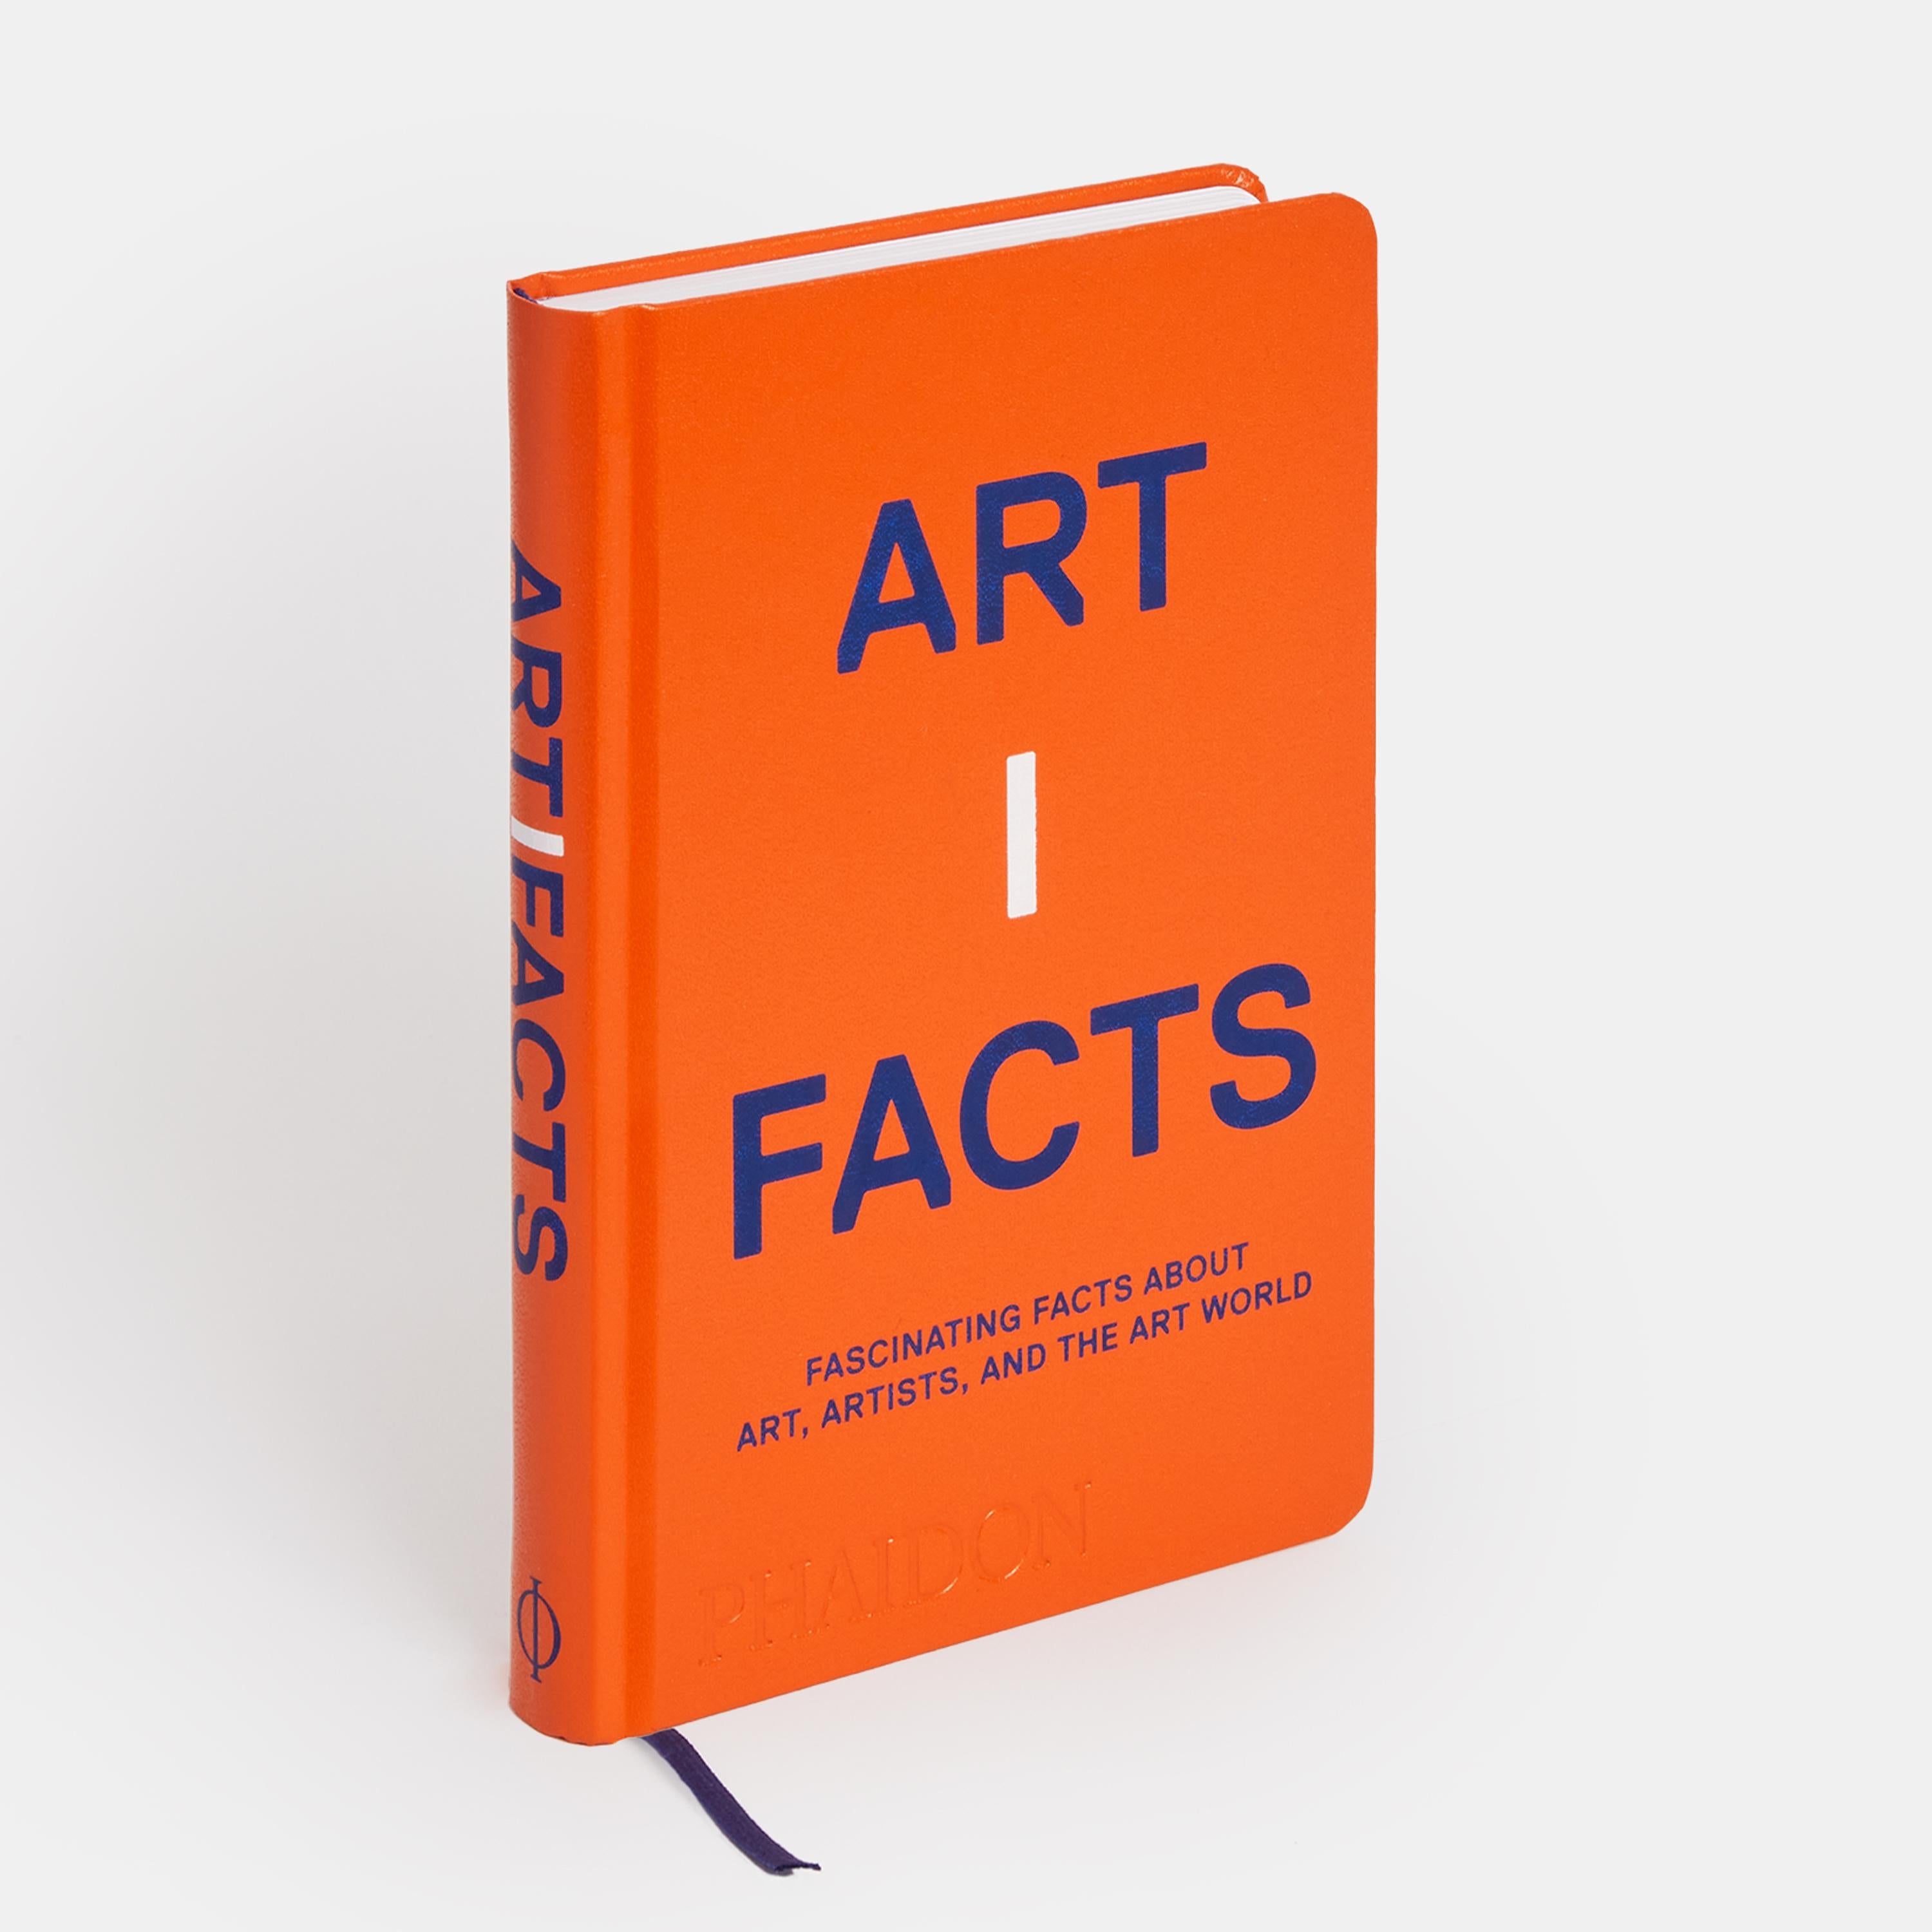 The perfect miscellany for every art lover – an essential and engaging collection of facts, figures, and findings about art, artists, and the art world, past and present

This extraordinary compendium of compelling facts, figures, and findings